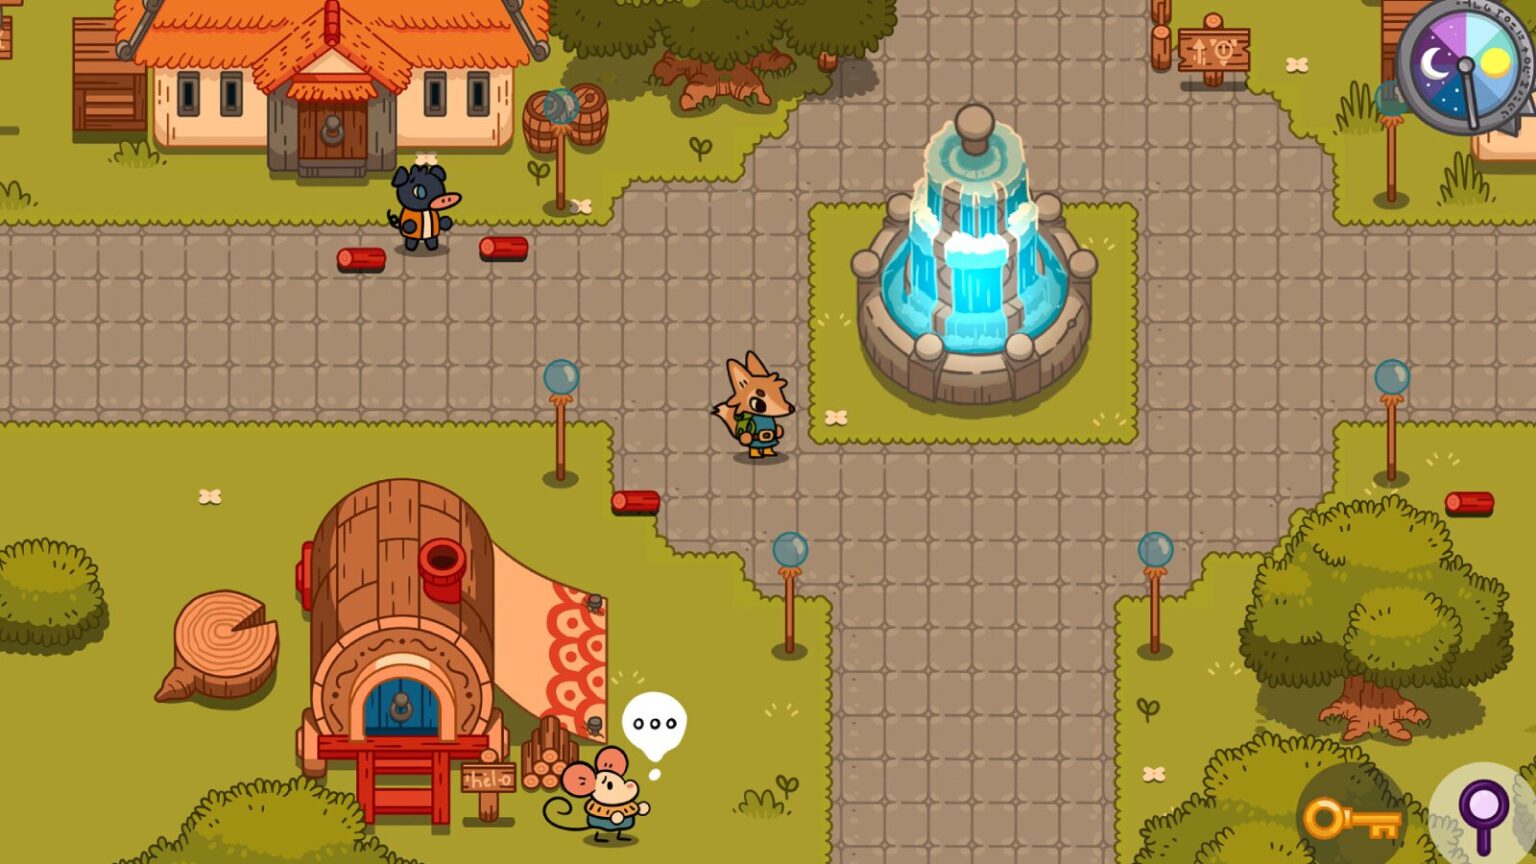 Lonesome Village scene shows a quaint town square with a fountain